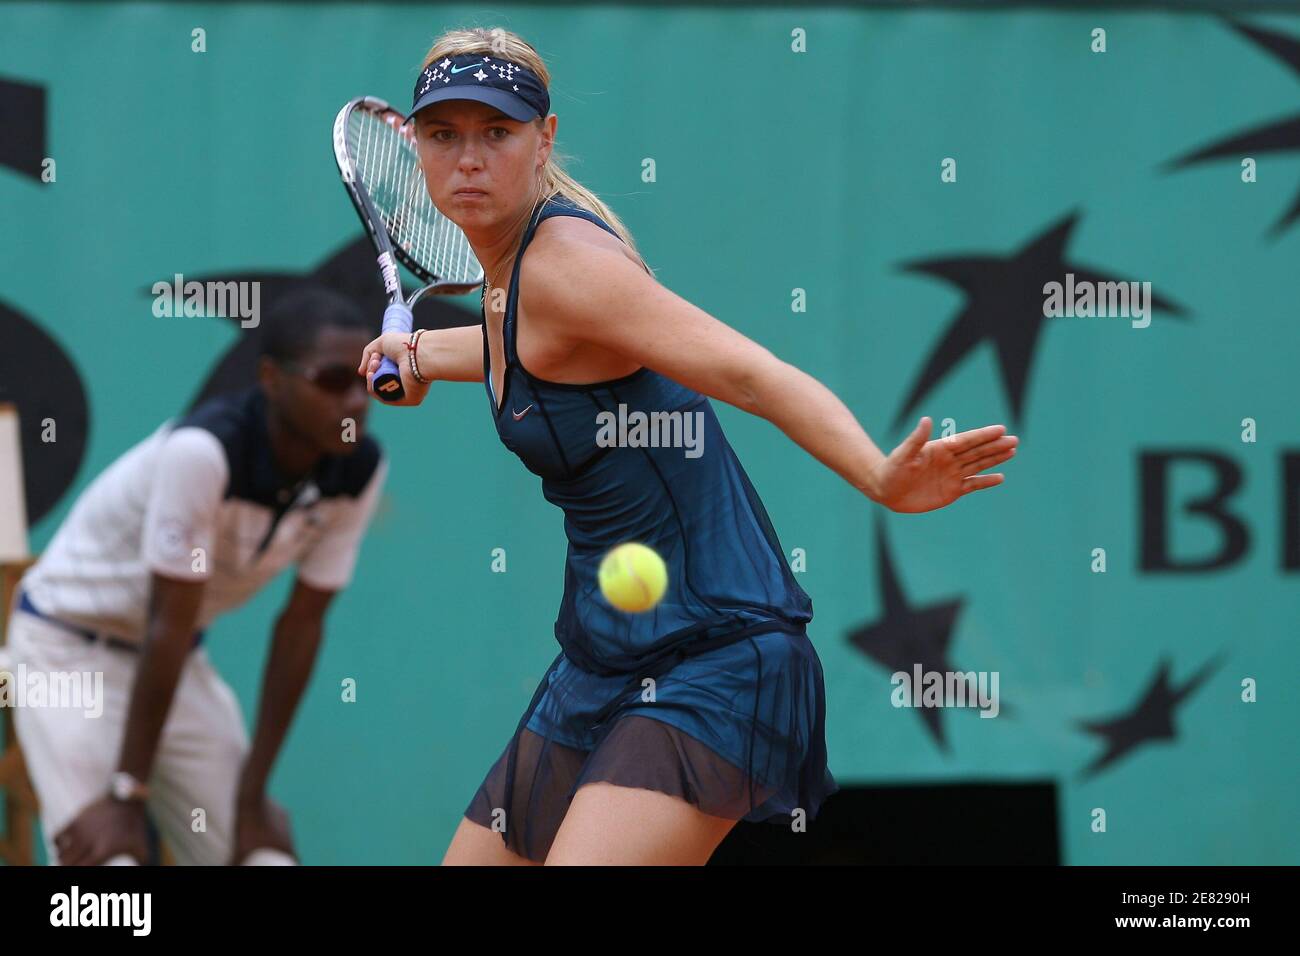 Russia's Maria Sharapova defeats, 6-3, 6-4, Russia's Anna Chakvetadze in their quater-final round match of the Tennis French Open at Roland Garros arena, in Paris, France on June 5, 2007. Photo by Gorassini-Gouhier-Guignebourg-Nebinger/Cameleon/ABACAPRESS.COM Stock Photo